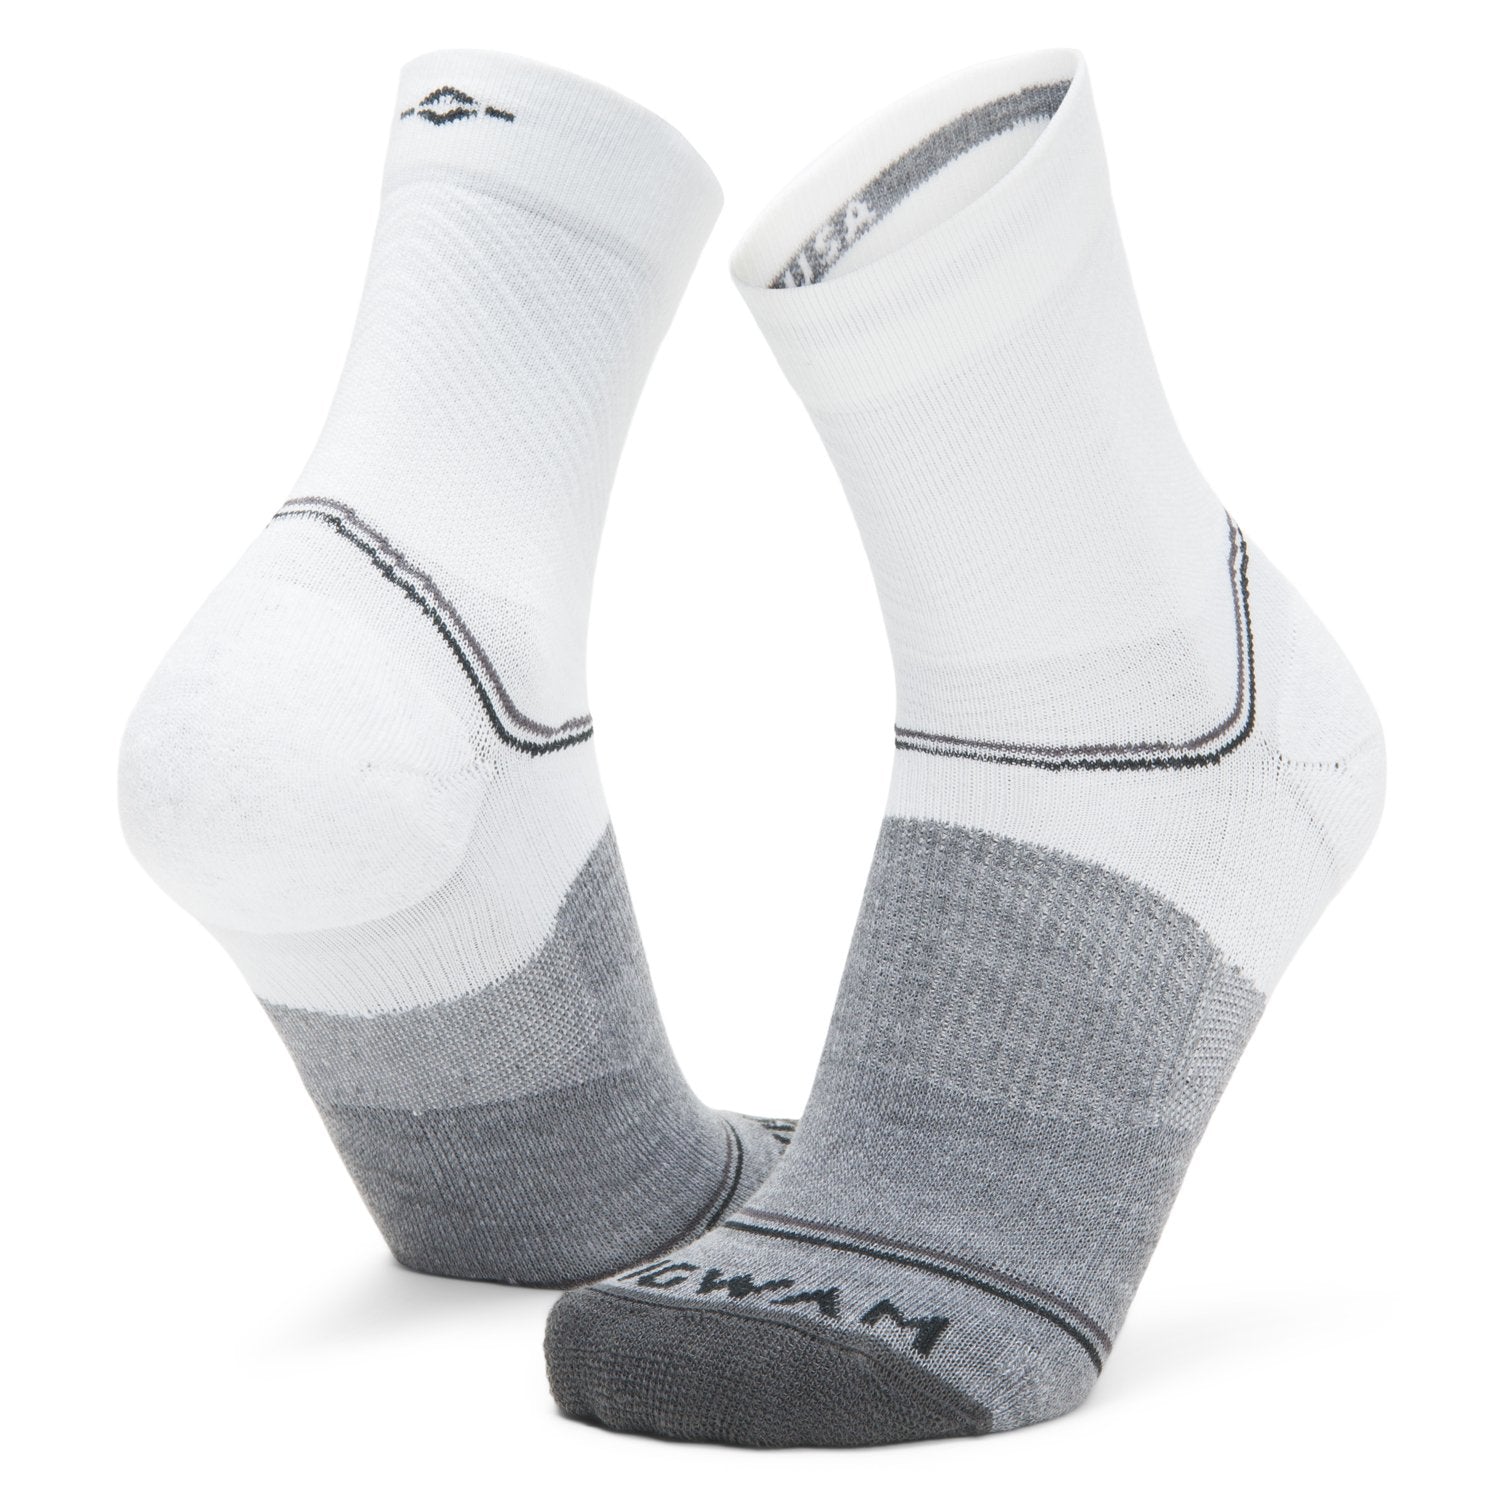 Surpass Lightweight Mid Crew Sock - White/Grey full product perspective - made in The USA Wigwam Socks